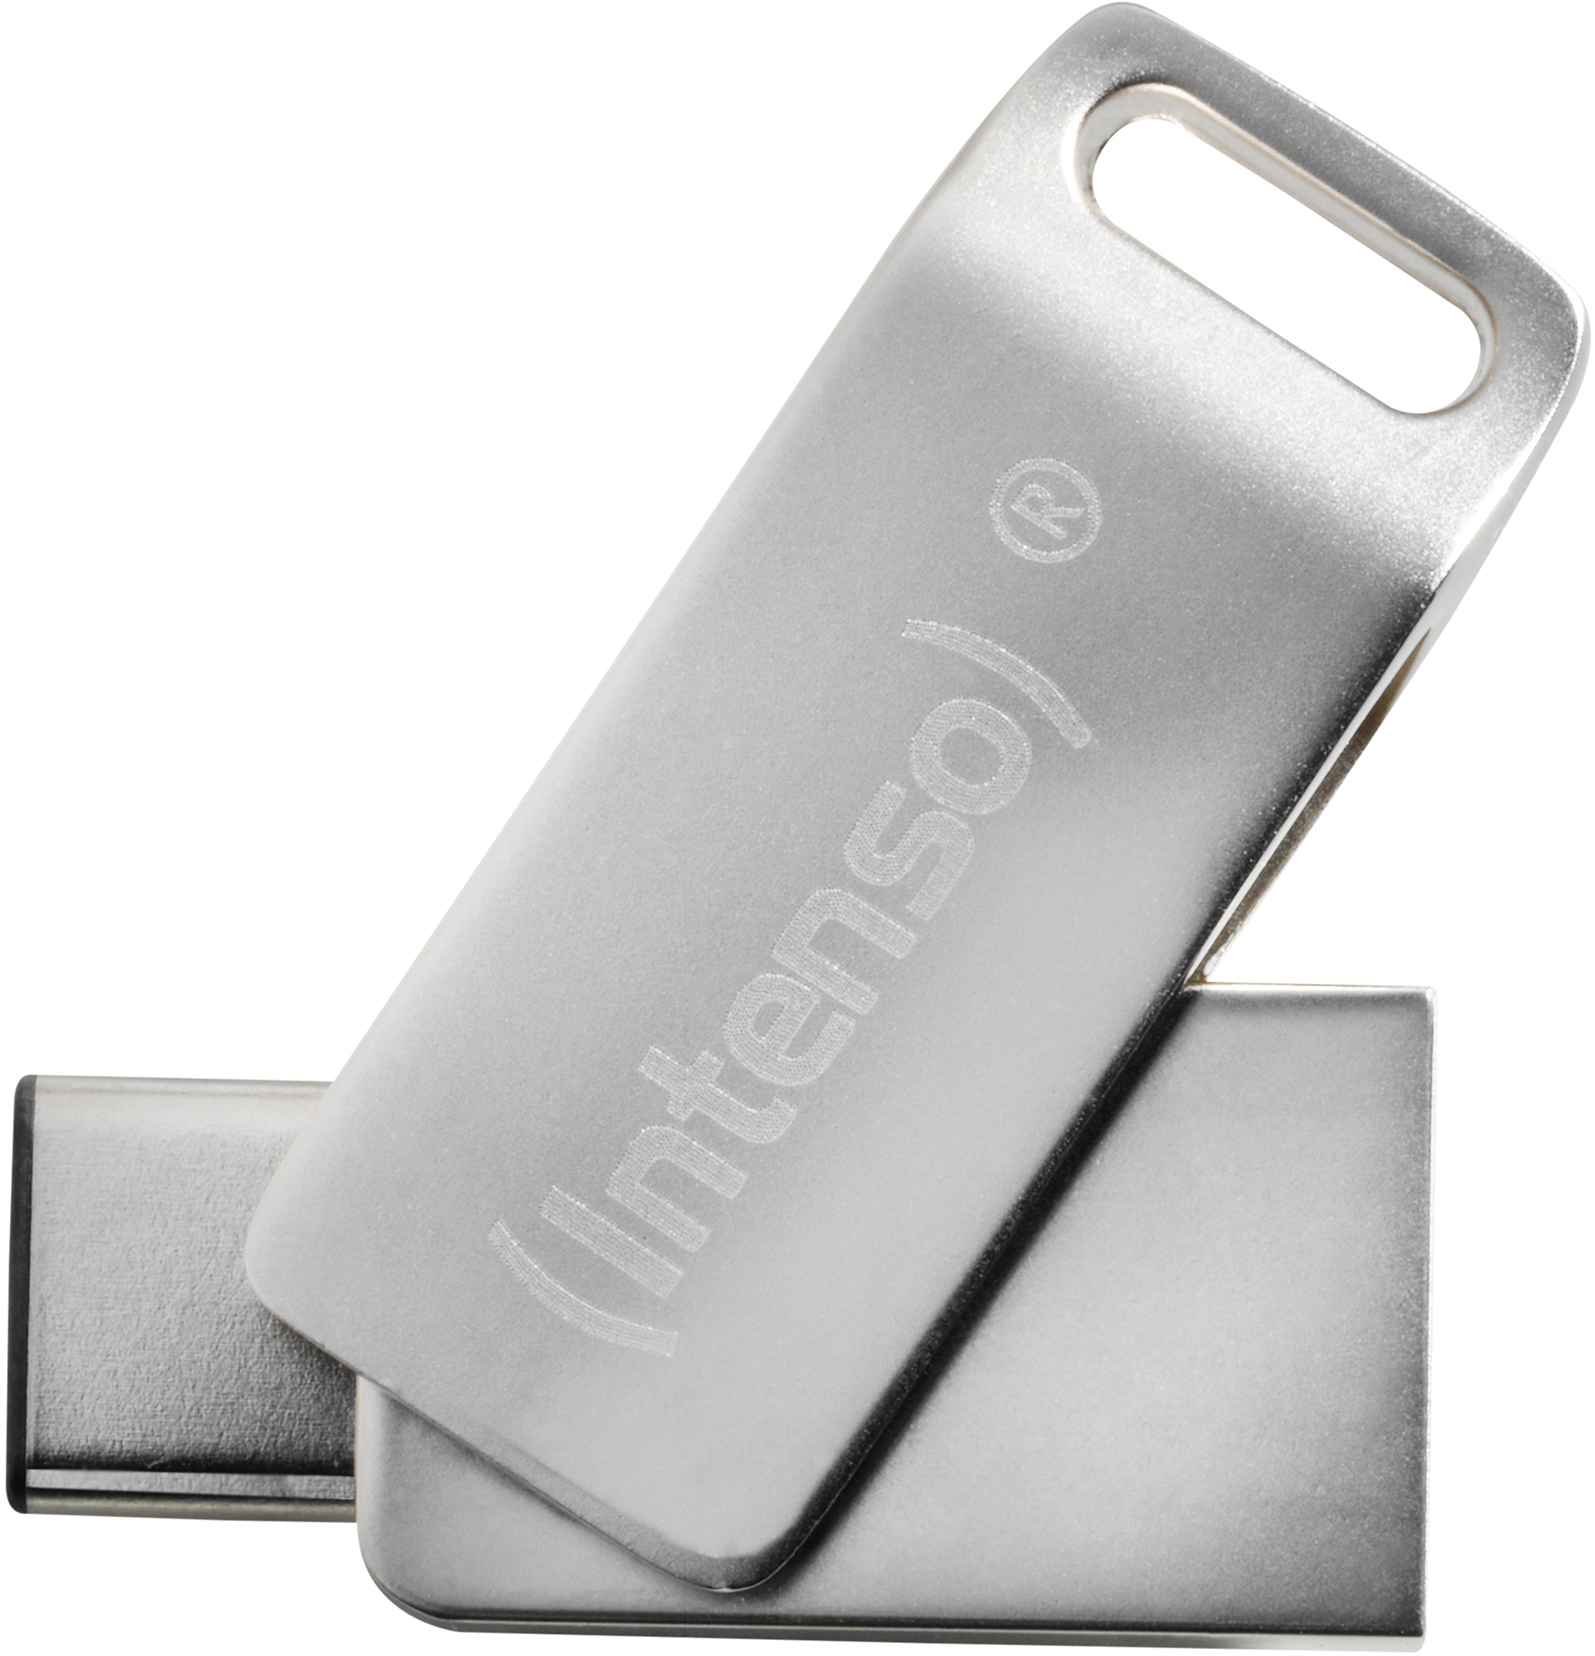 INTENSO CMOBILE LINE USB-Stick, 32 Silber 70 MB/s, GB